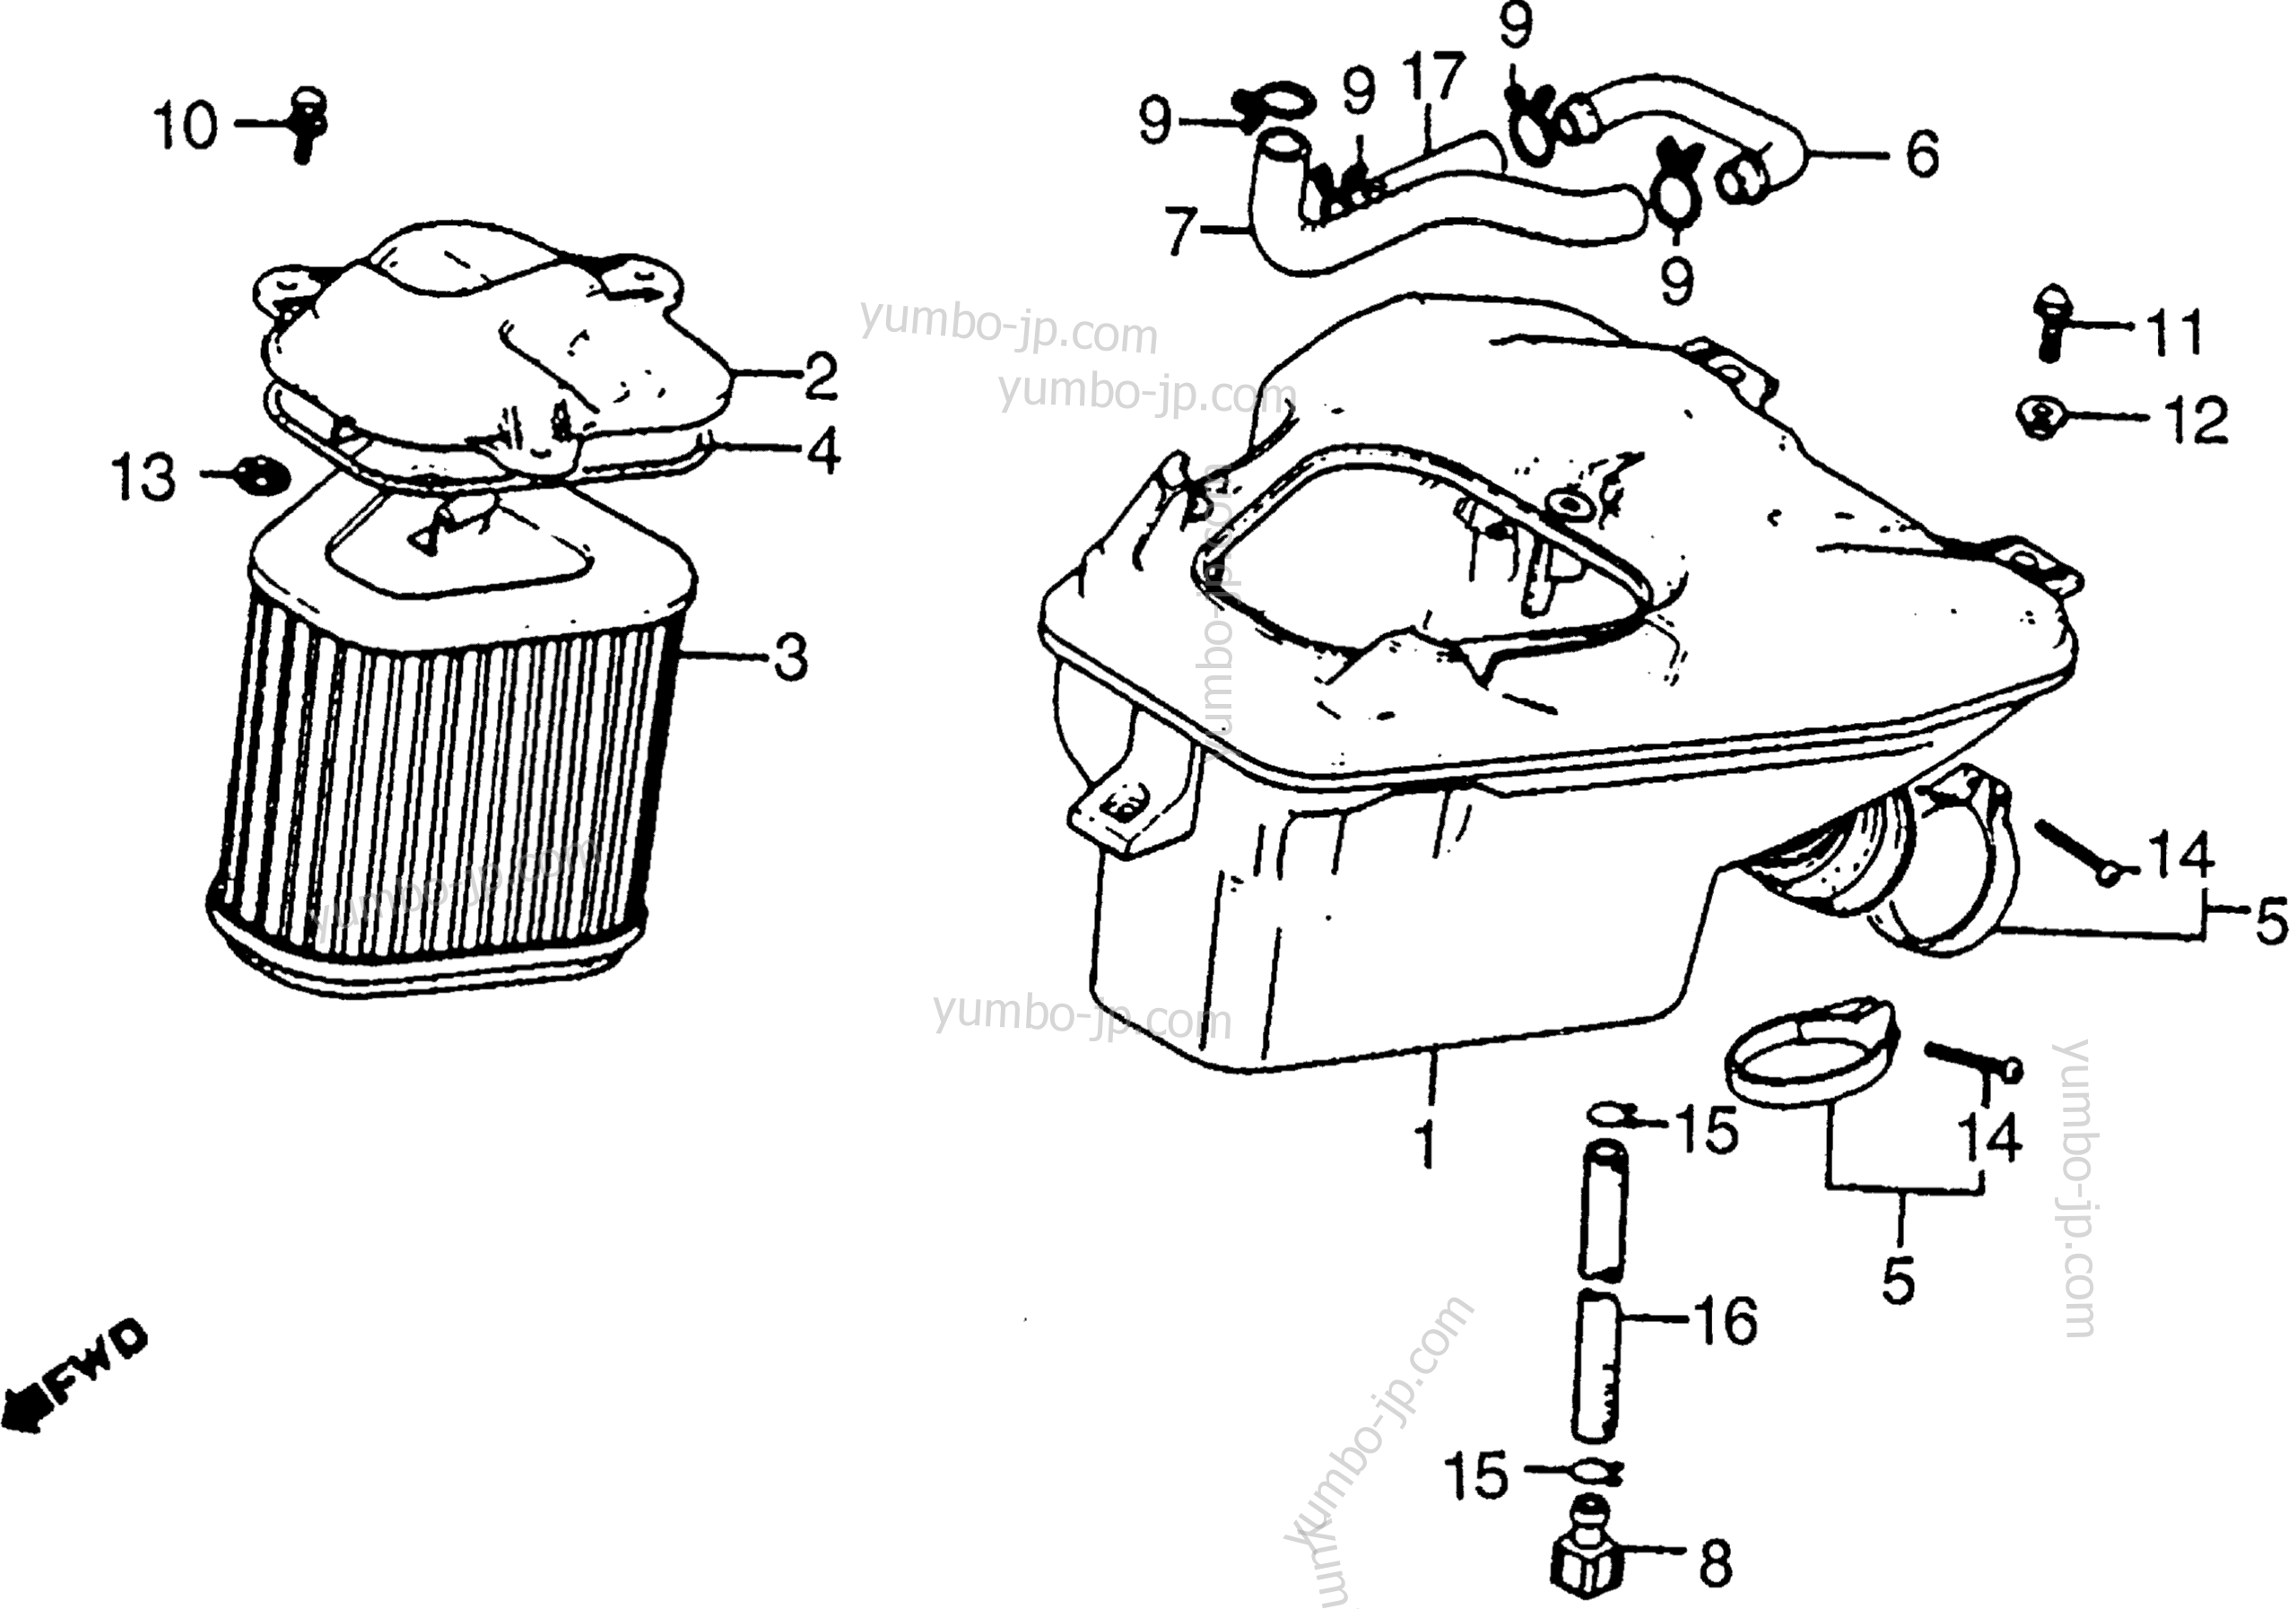 AIR CLEANER for motorcycles HONDA VT1100C A 1986 year